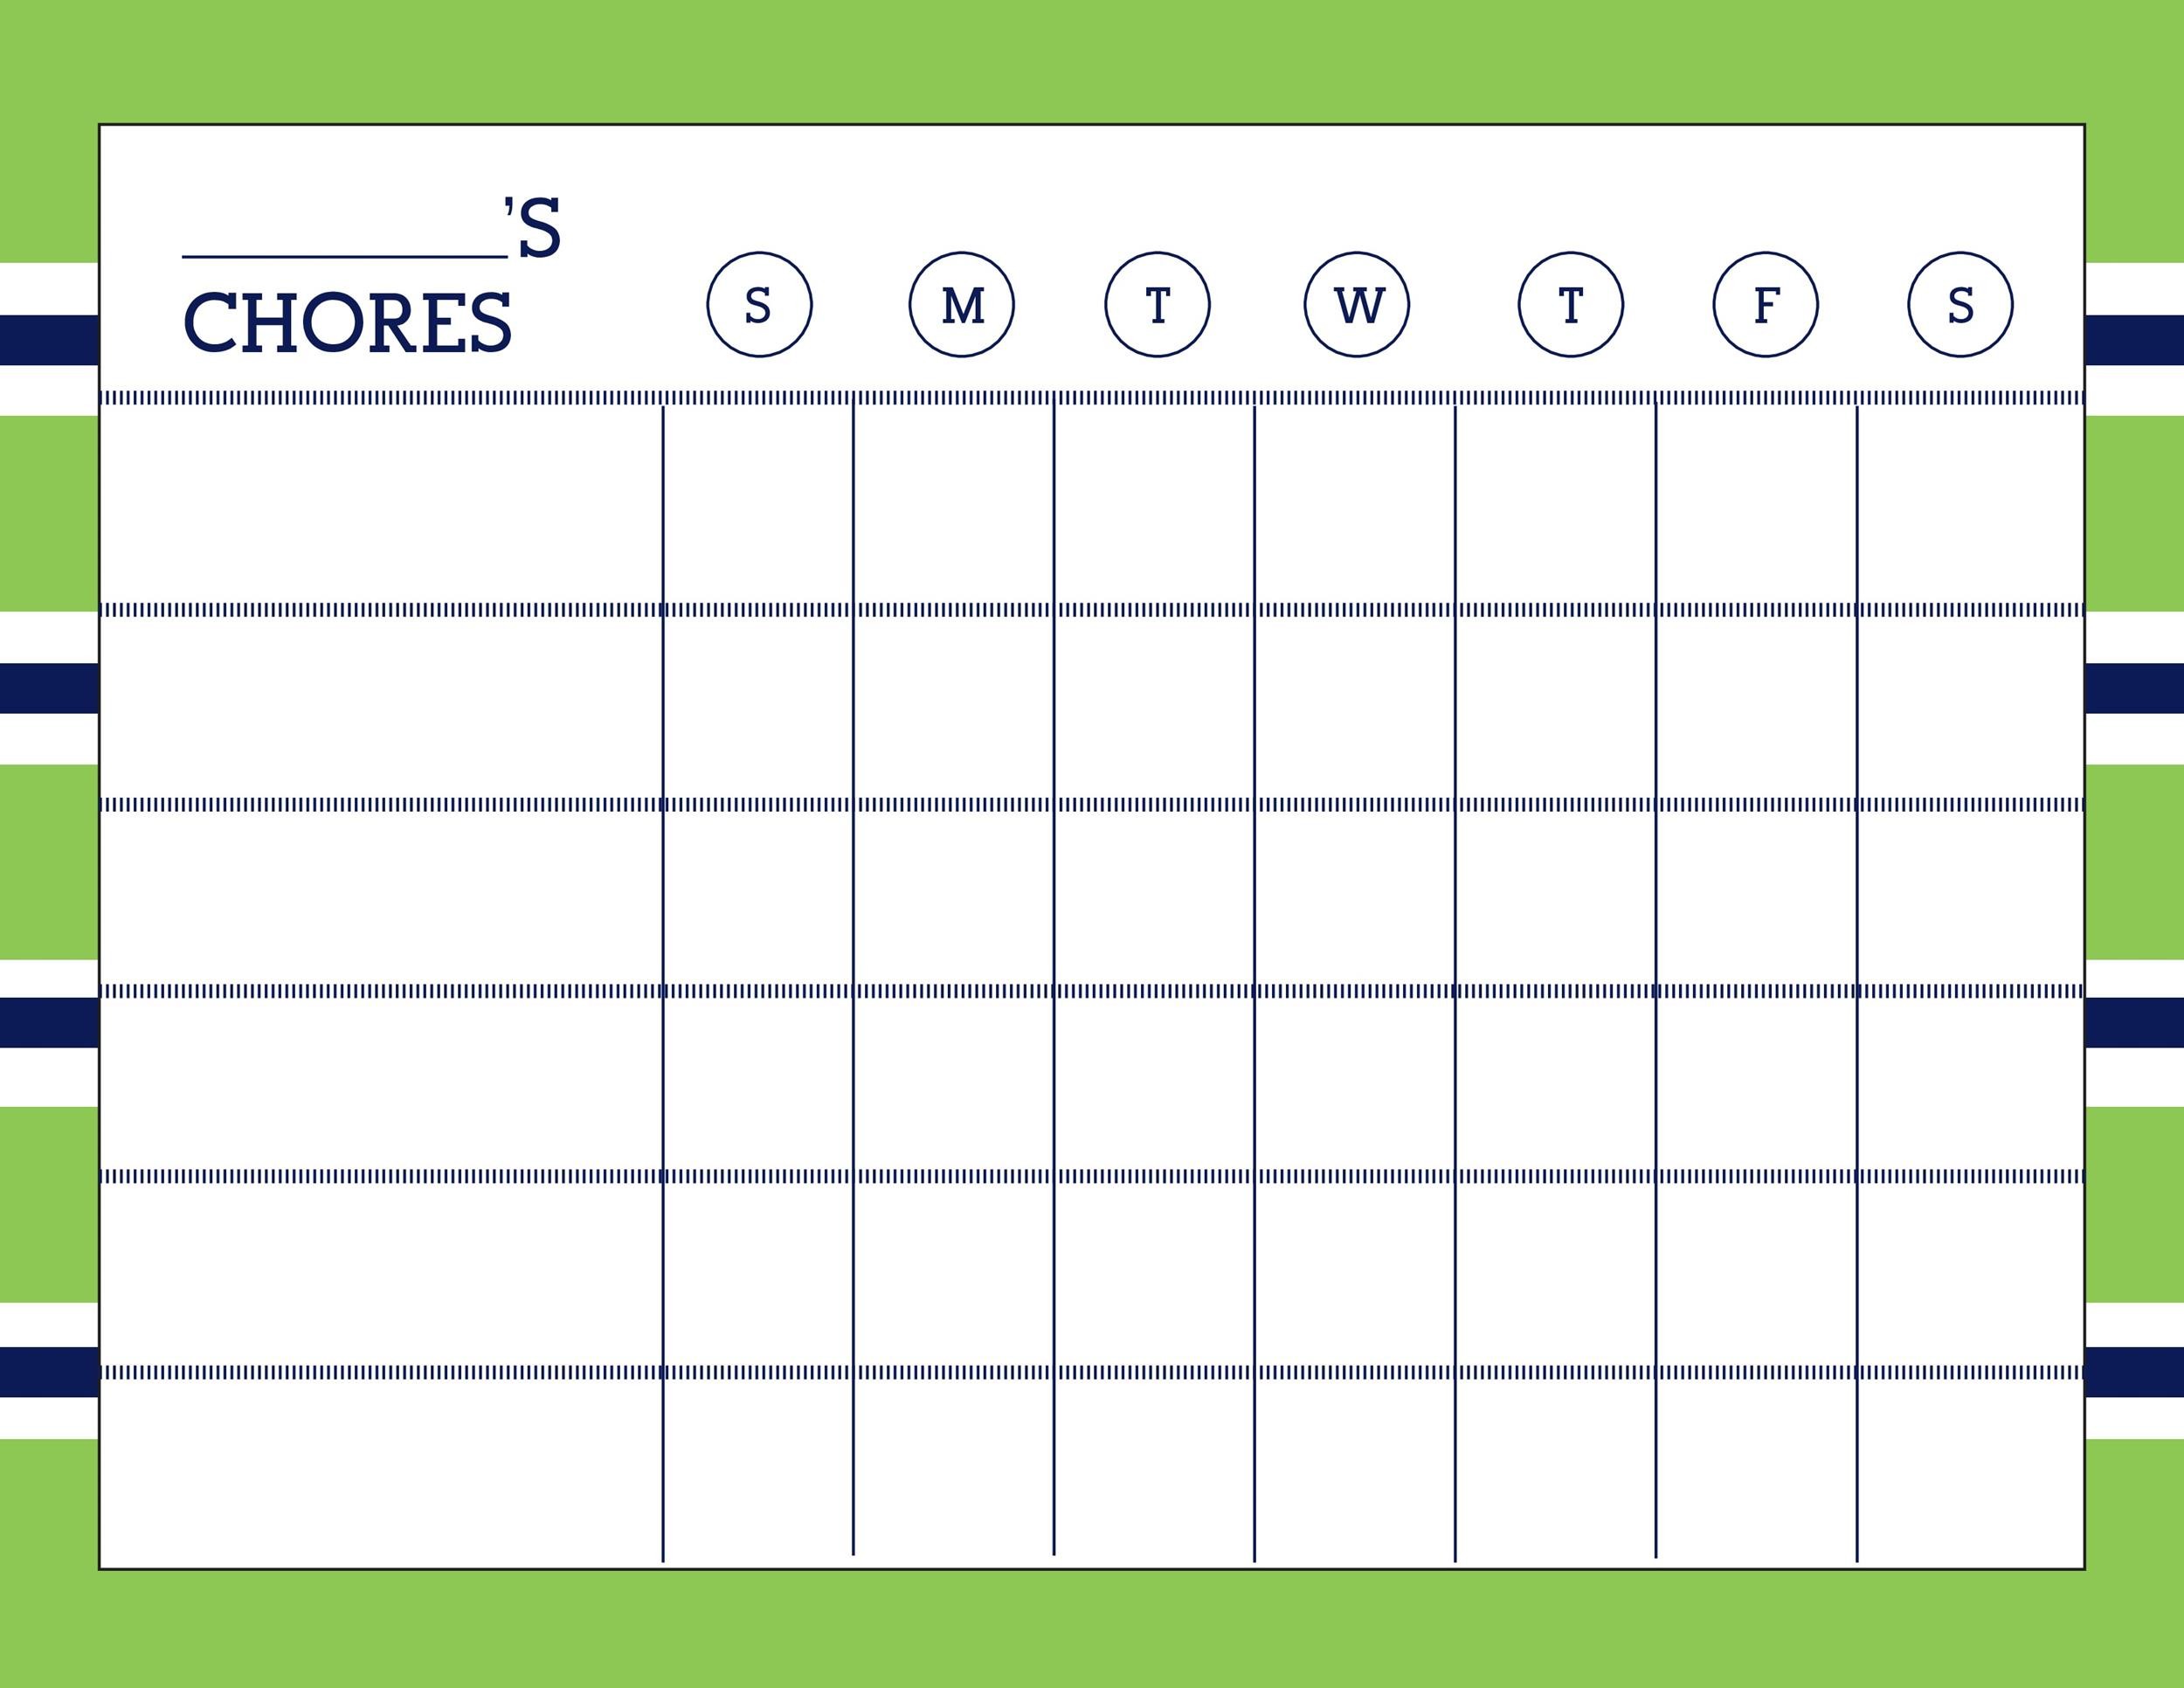 46-free-chore-chart-templates-for-kids-templatelab